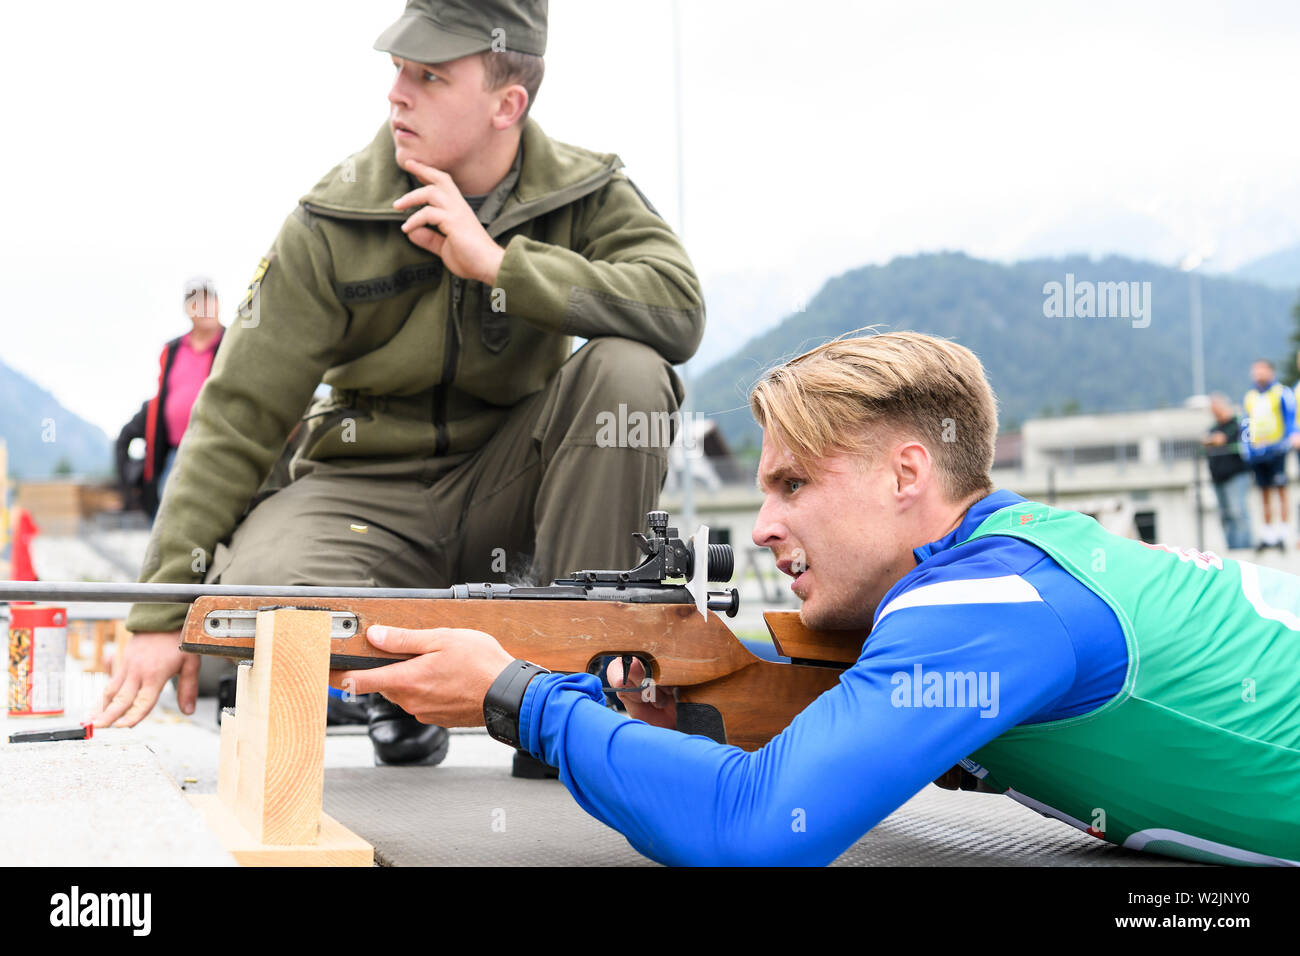 Teambuilding at afterwithtag in biathlon stadium. Marco Thiede (KSC) at the shooting range. GES / football / 2nd Bundesliga: training camp of the Karlsruhe Sports Club in Waidring, 07/09/2019 Football / Soccer: 2nd League: training camp Karlsruher SC, Waidring, Austria, July 9, 2019 | usage worldwide Stock Photo